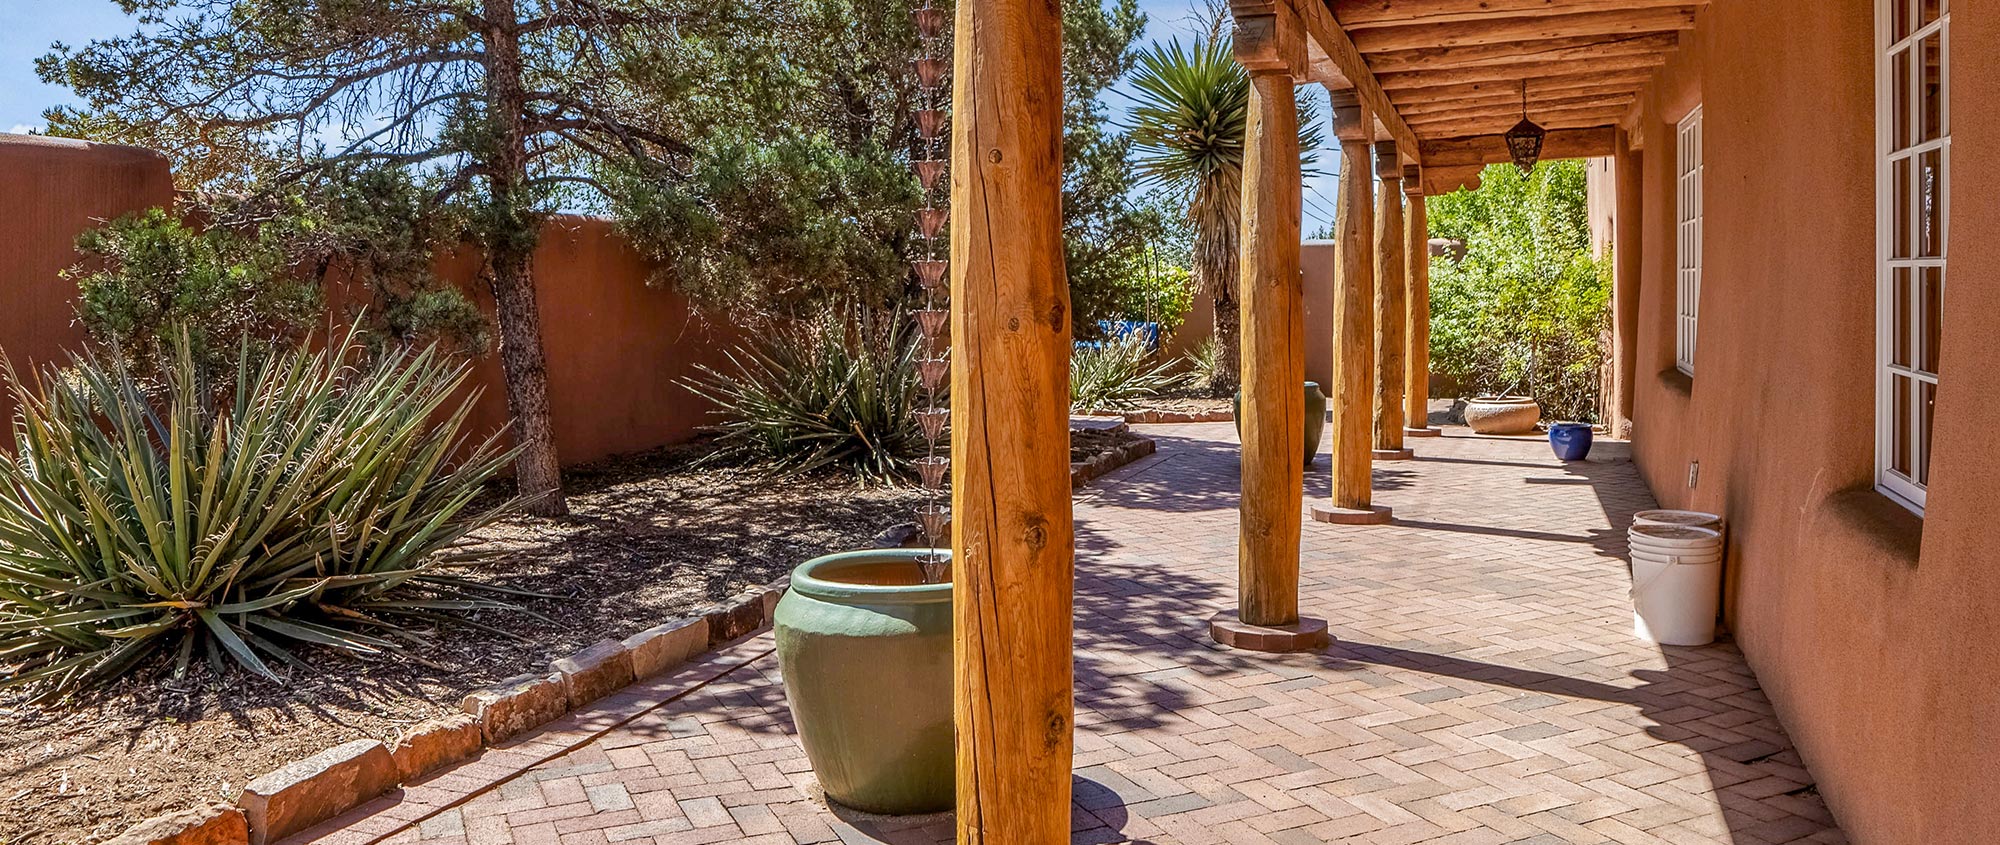 A covered portal with supporting posts, exterior bricks in walled courtyard with trees and yucca plants in Santa Fe, NM.